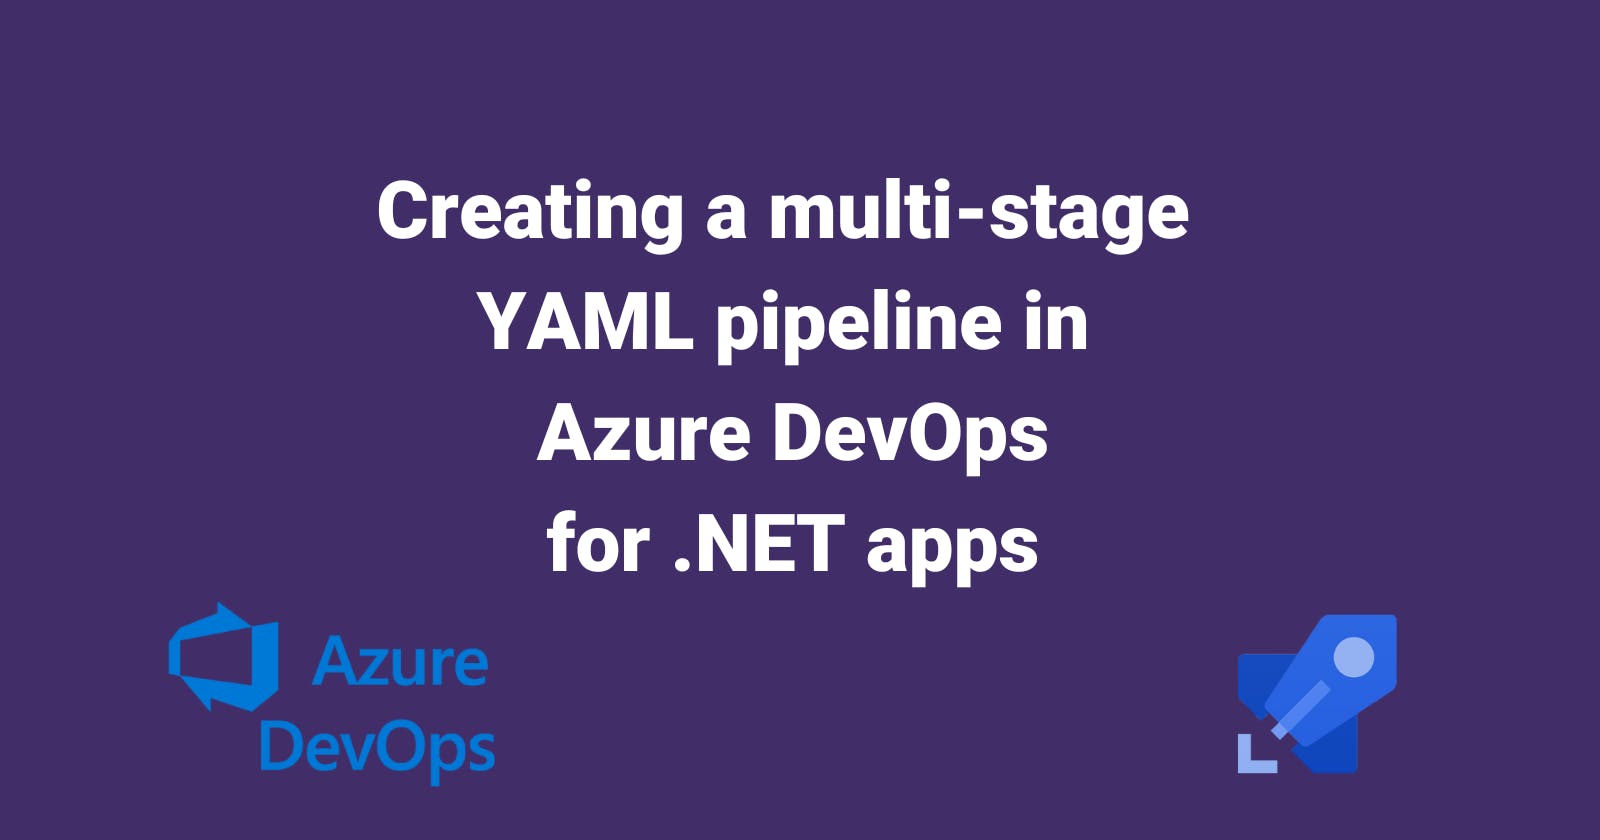 Creating a multi-stage YAML pipeline in Azure DevOps for .NET projects